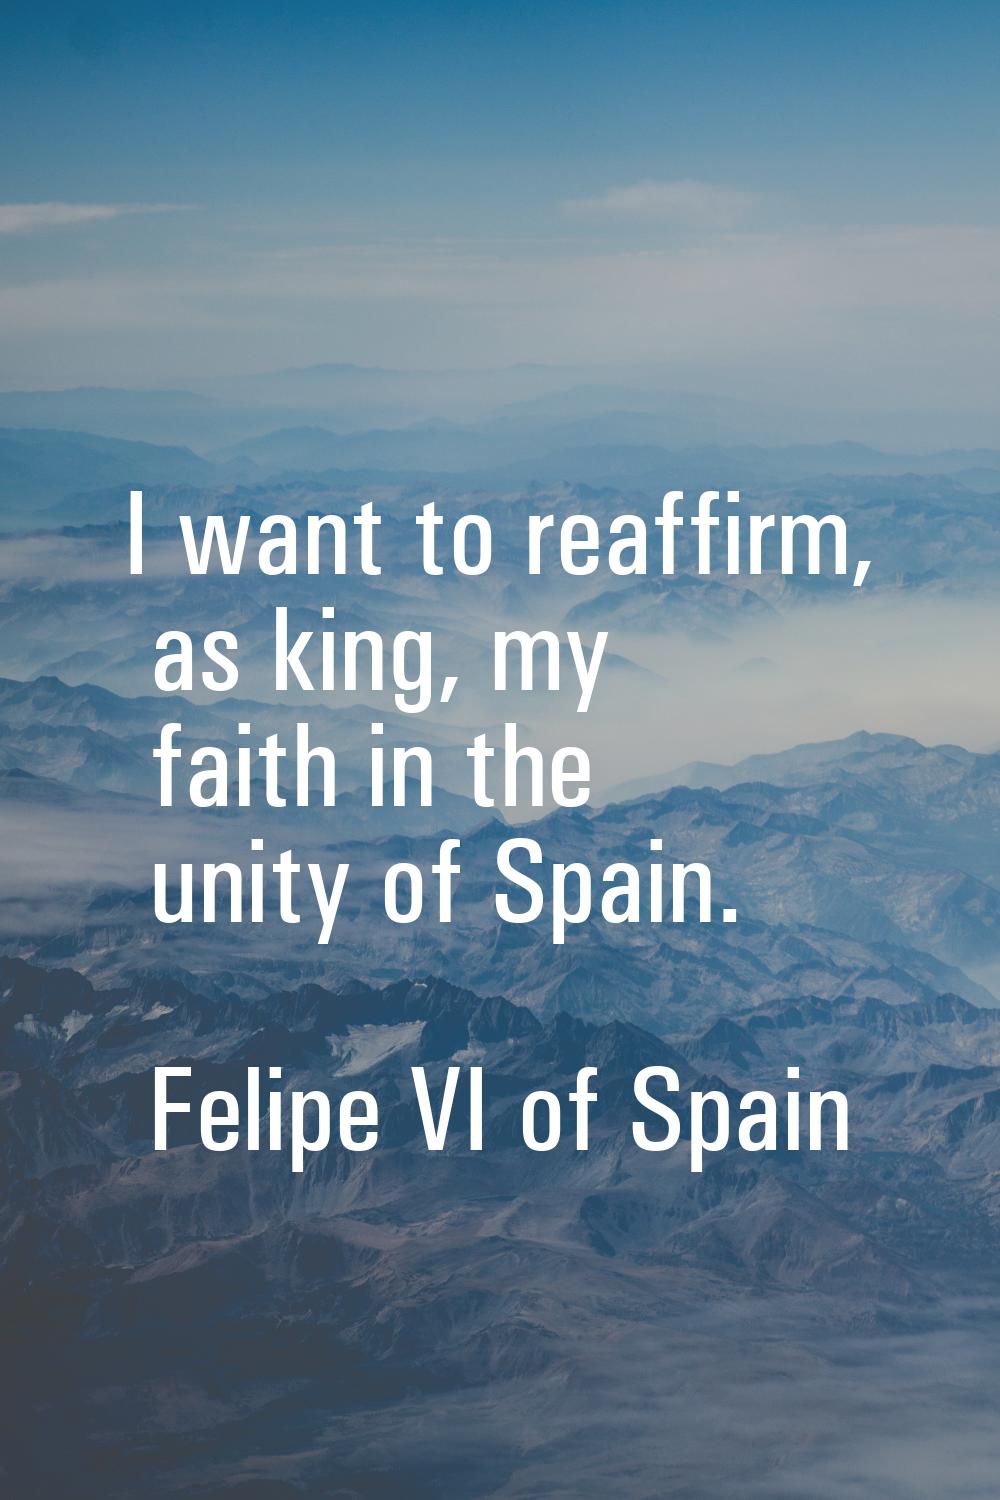 I want to reaffirm, as king, my faith in the unity of Spain.